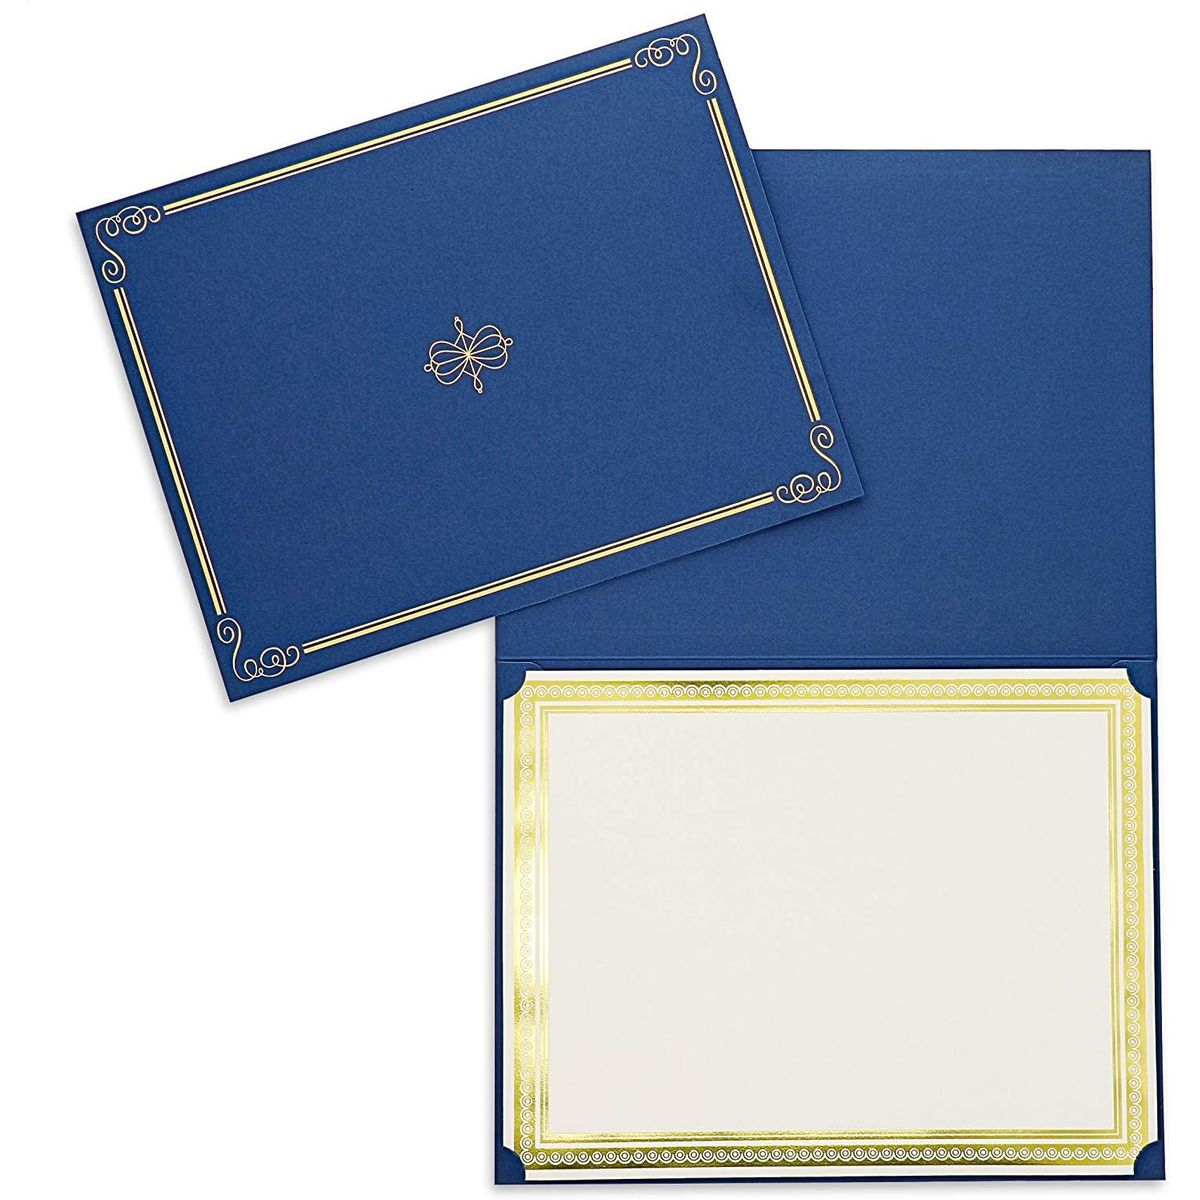 Gold Foil Stamped Certificate Document Cover - Blue